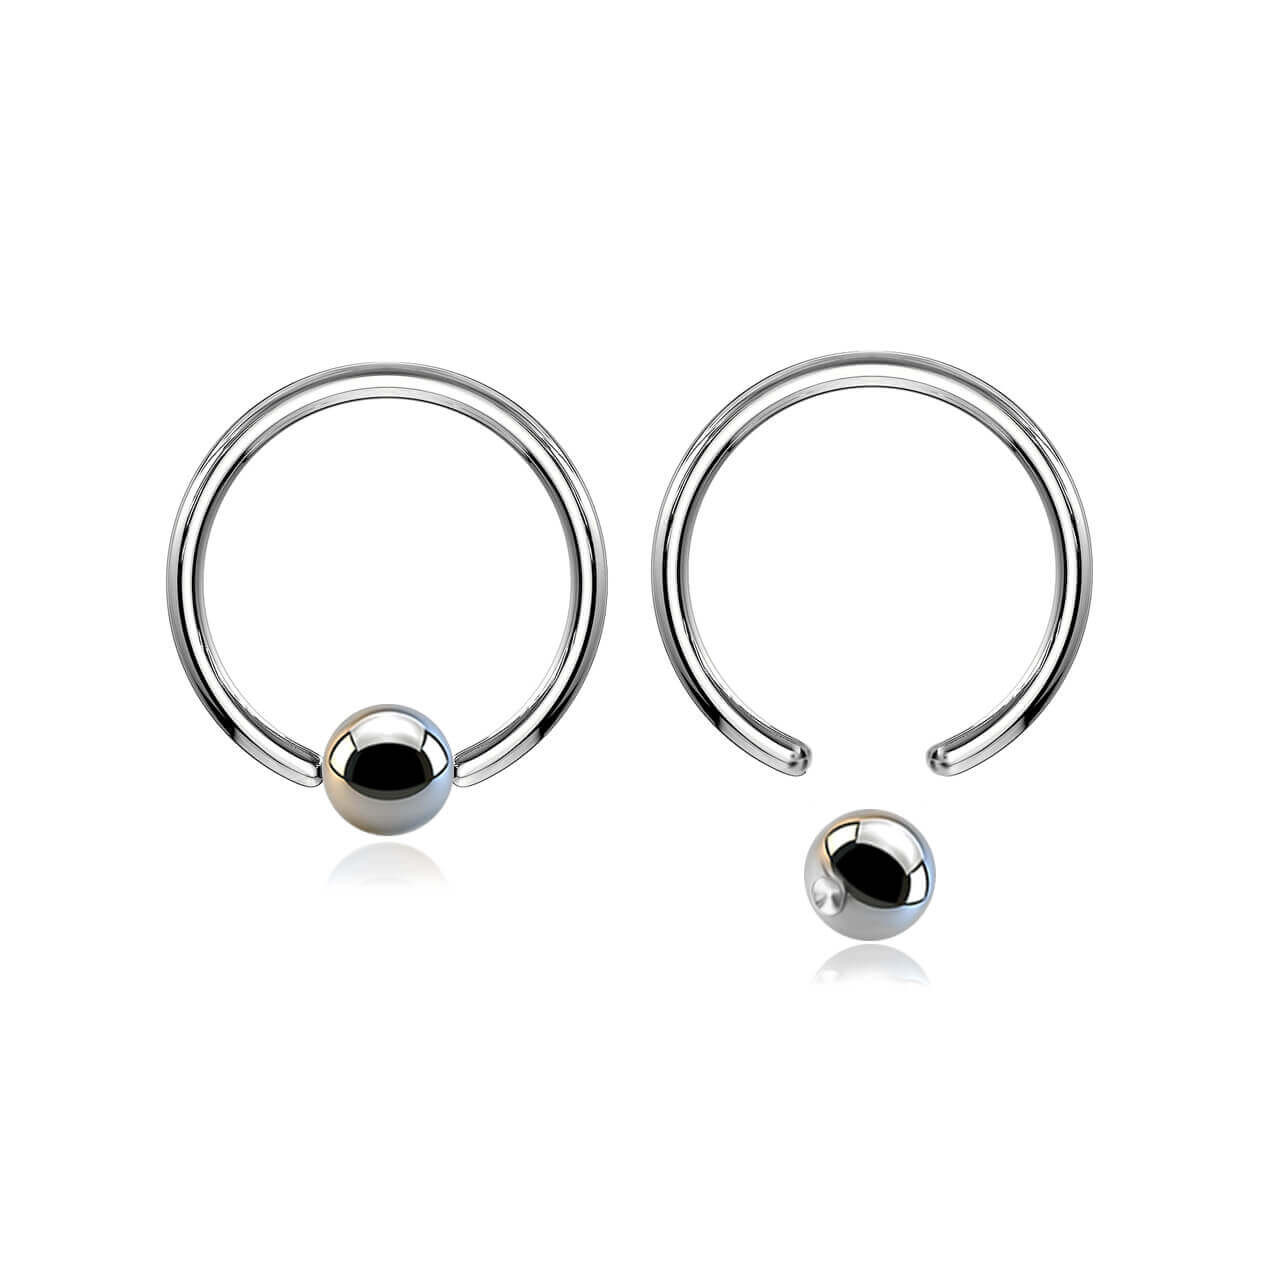 SBC2B5 Wholesale Pack of 25 surgical steel ball closure rings, Thickness 2mm, Ball size 5mm